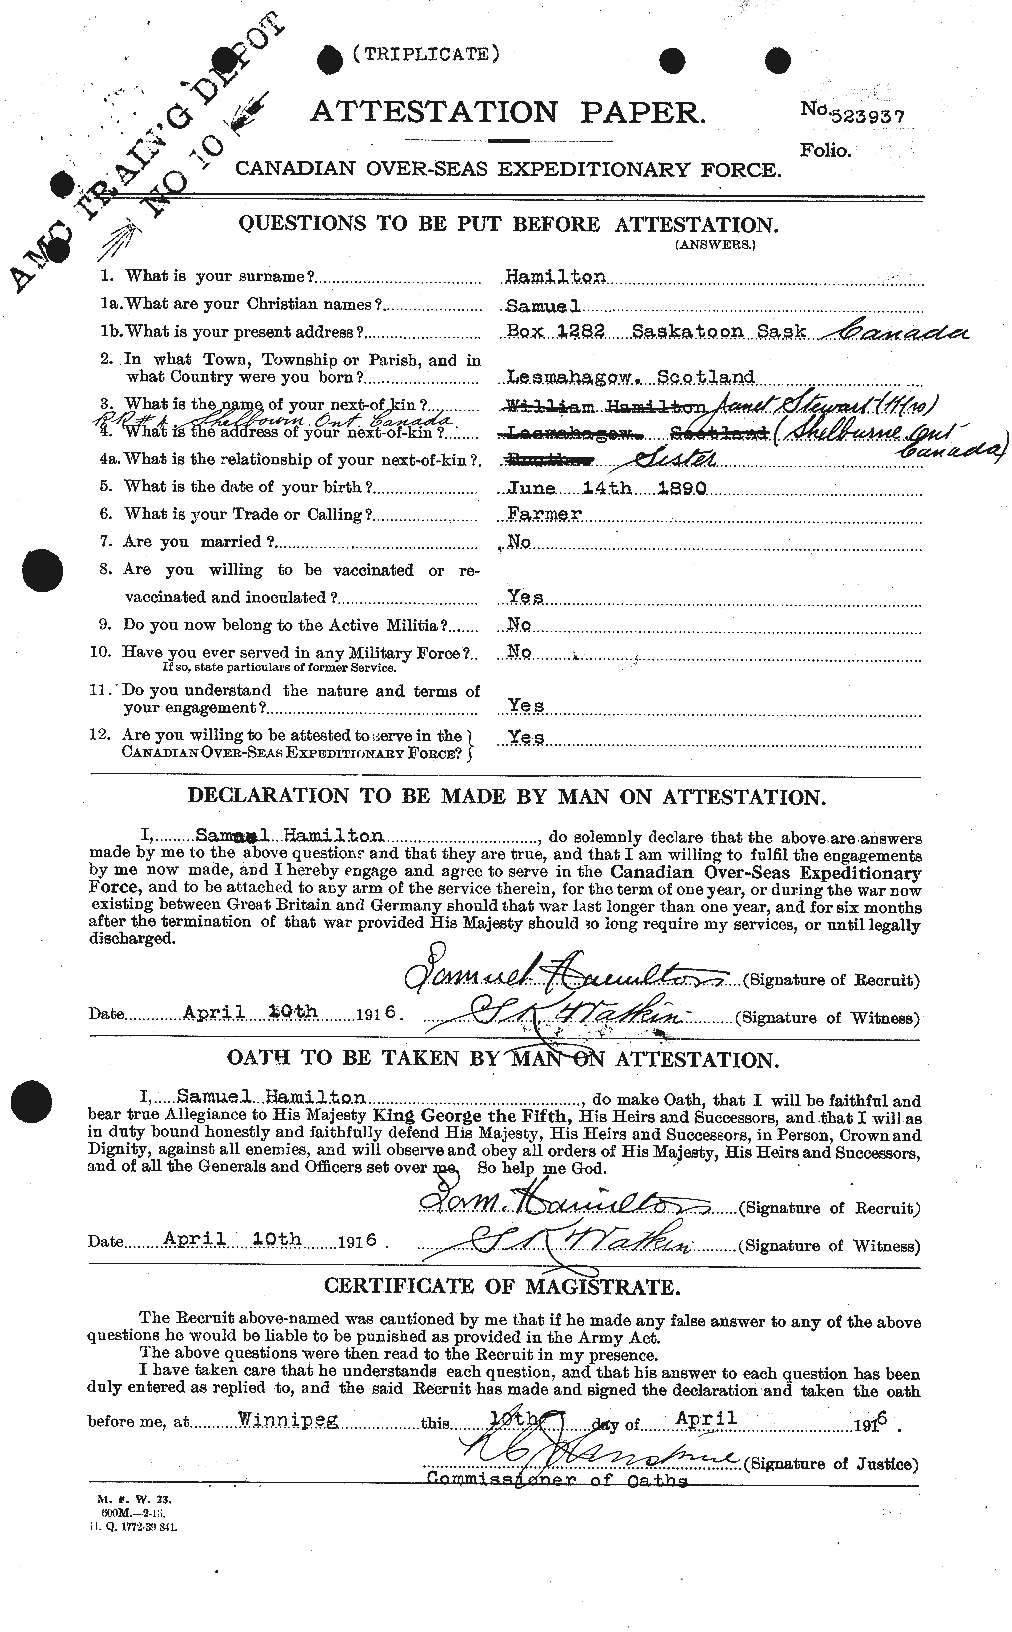 Personnel Records of the First World War - CEF 373306a